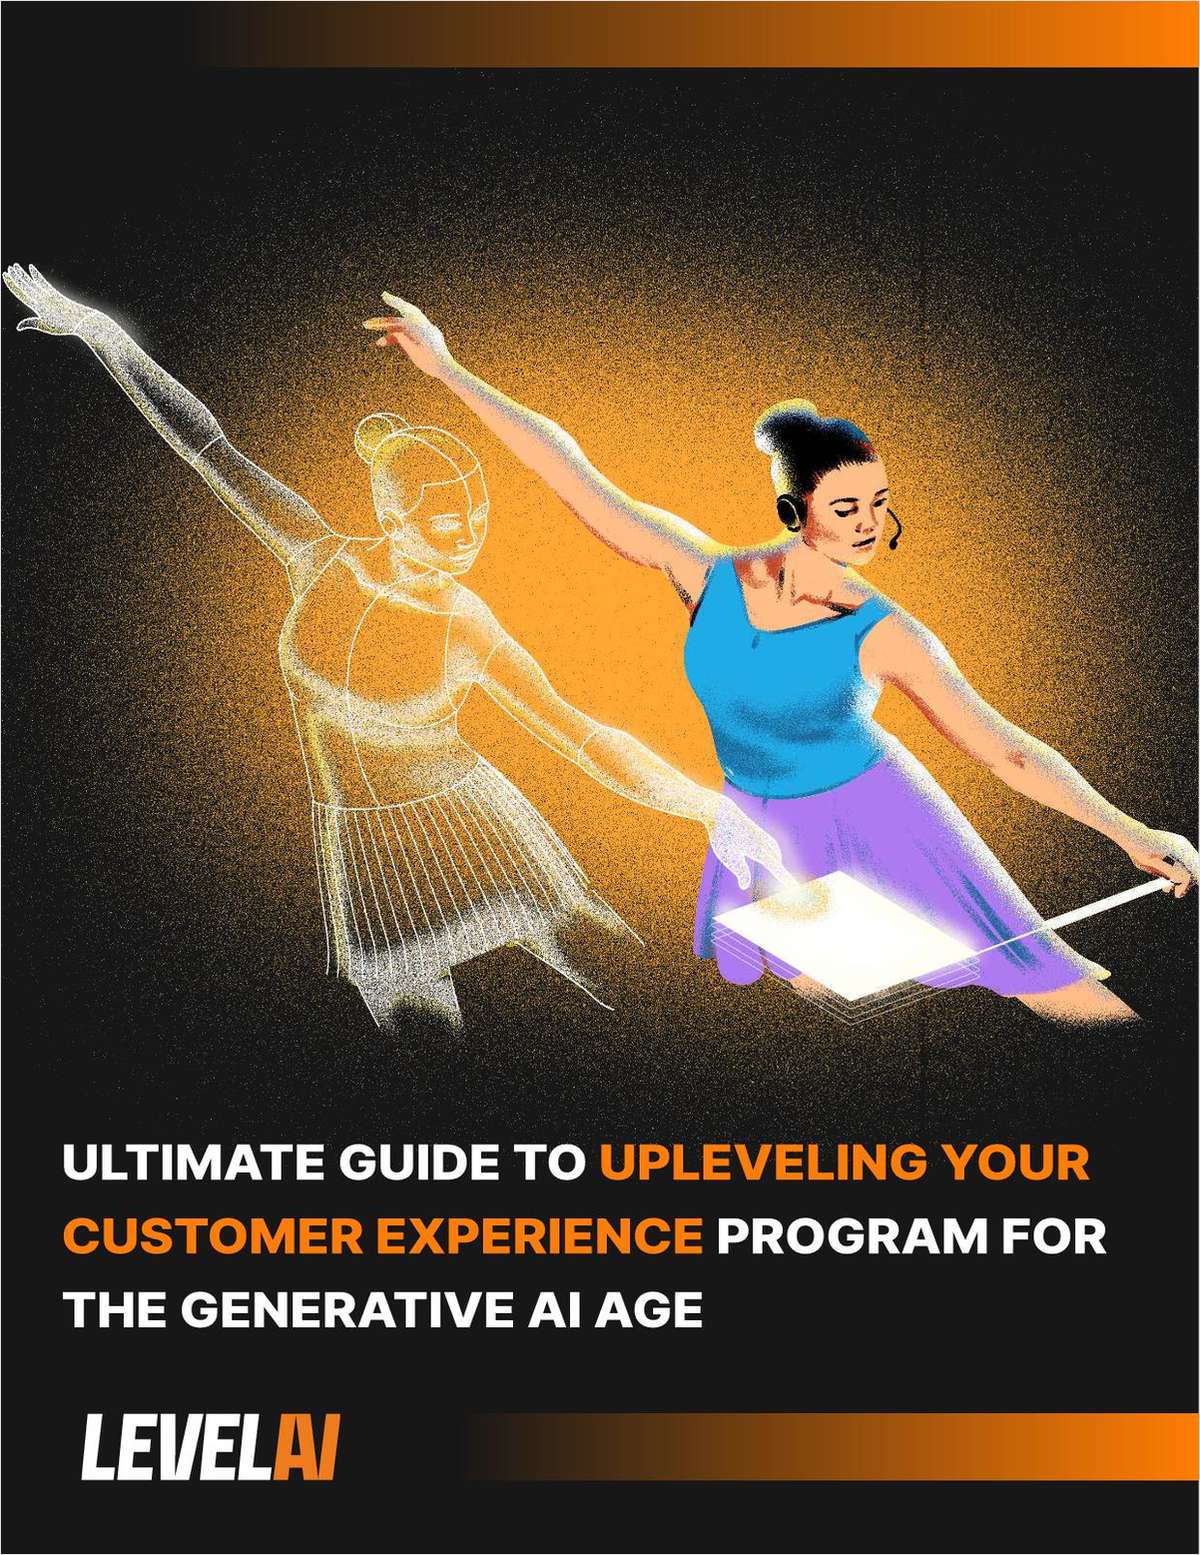 Ultimate Guide for Upleveling your Customer Experience Program for the Generative AI Age